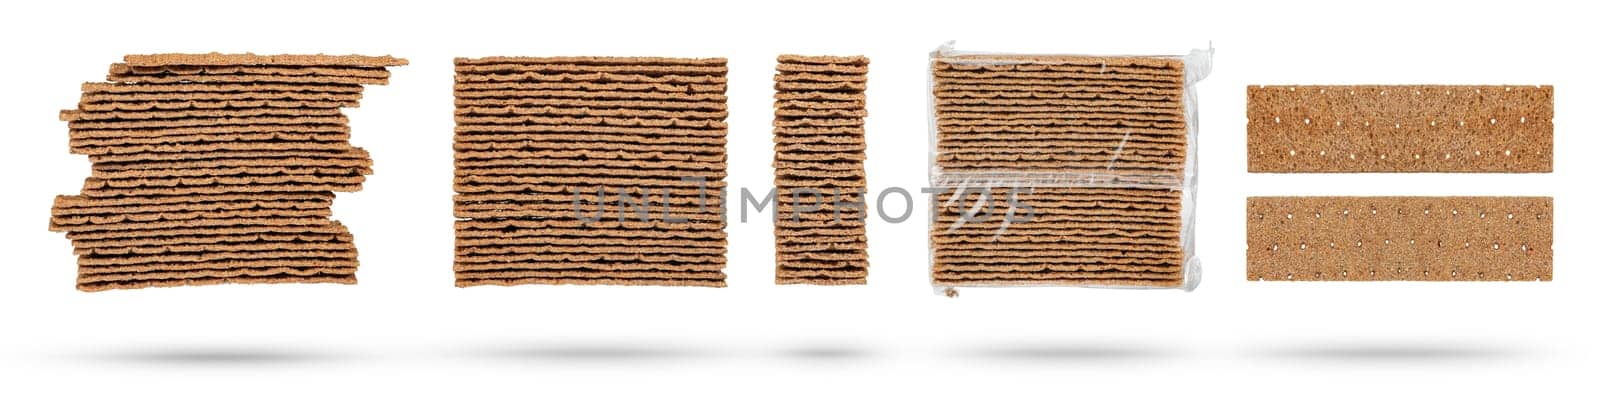 Set of different rye chips on a white background. The chips are stacked one on top of the other, close-up side view. A set of dried bread slices for sandwiches